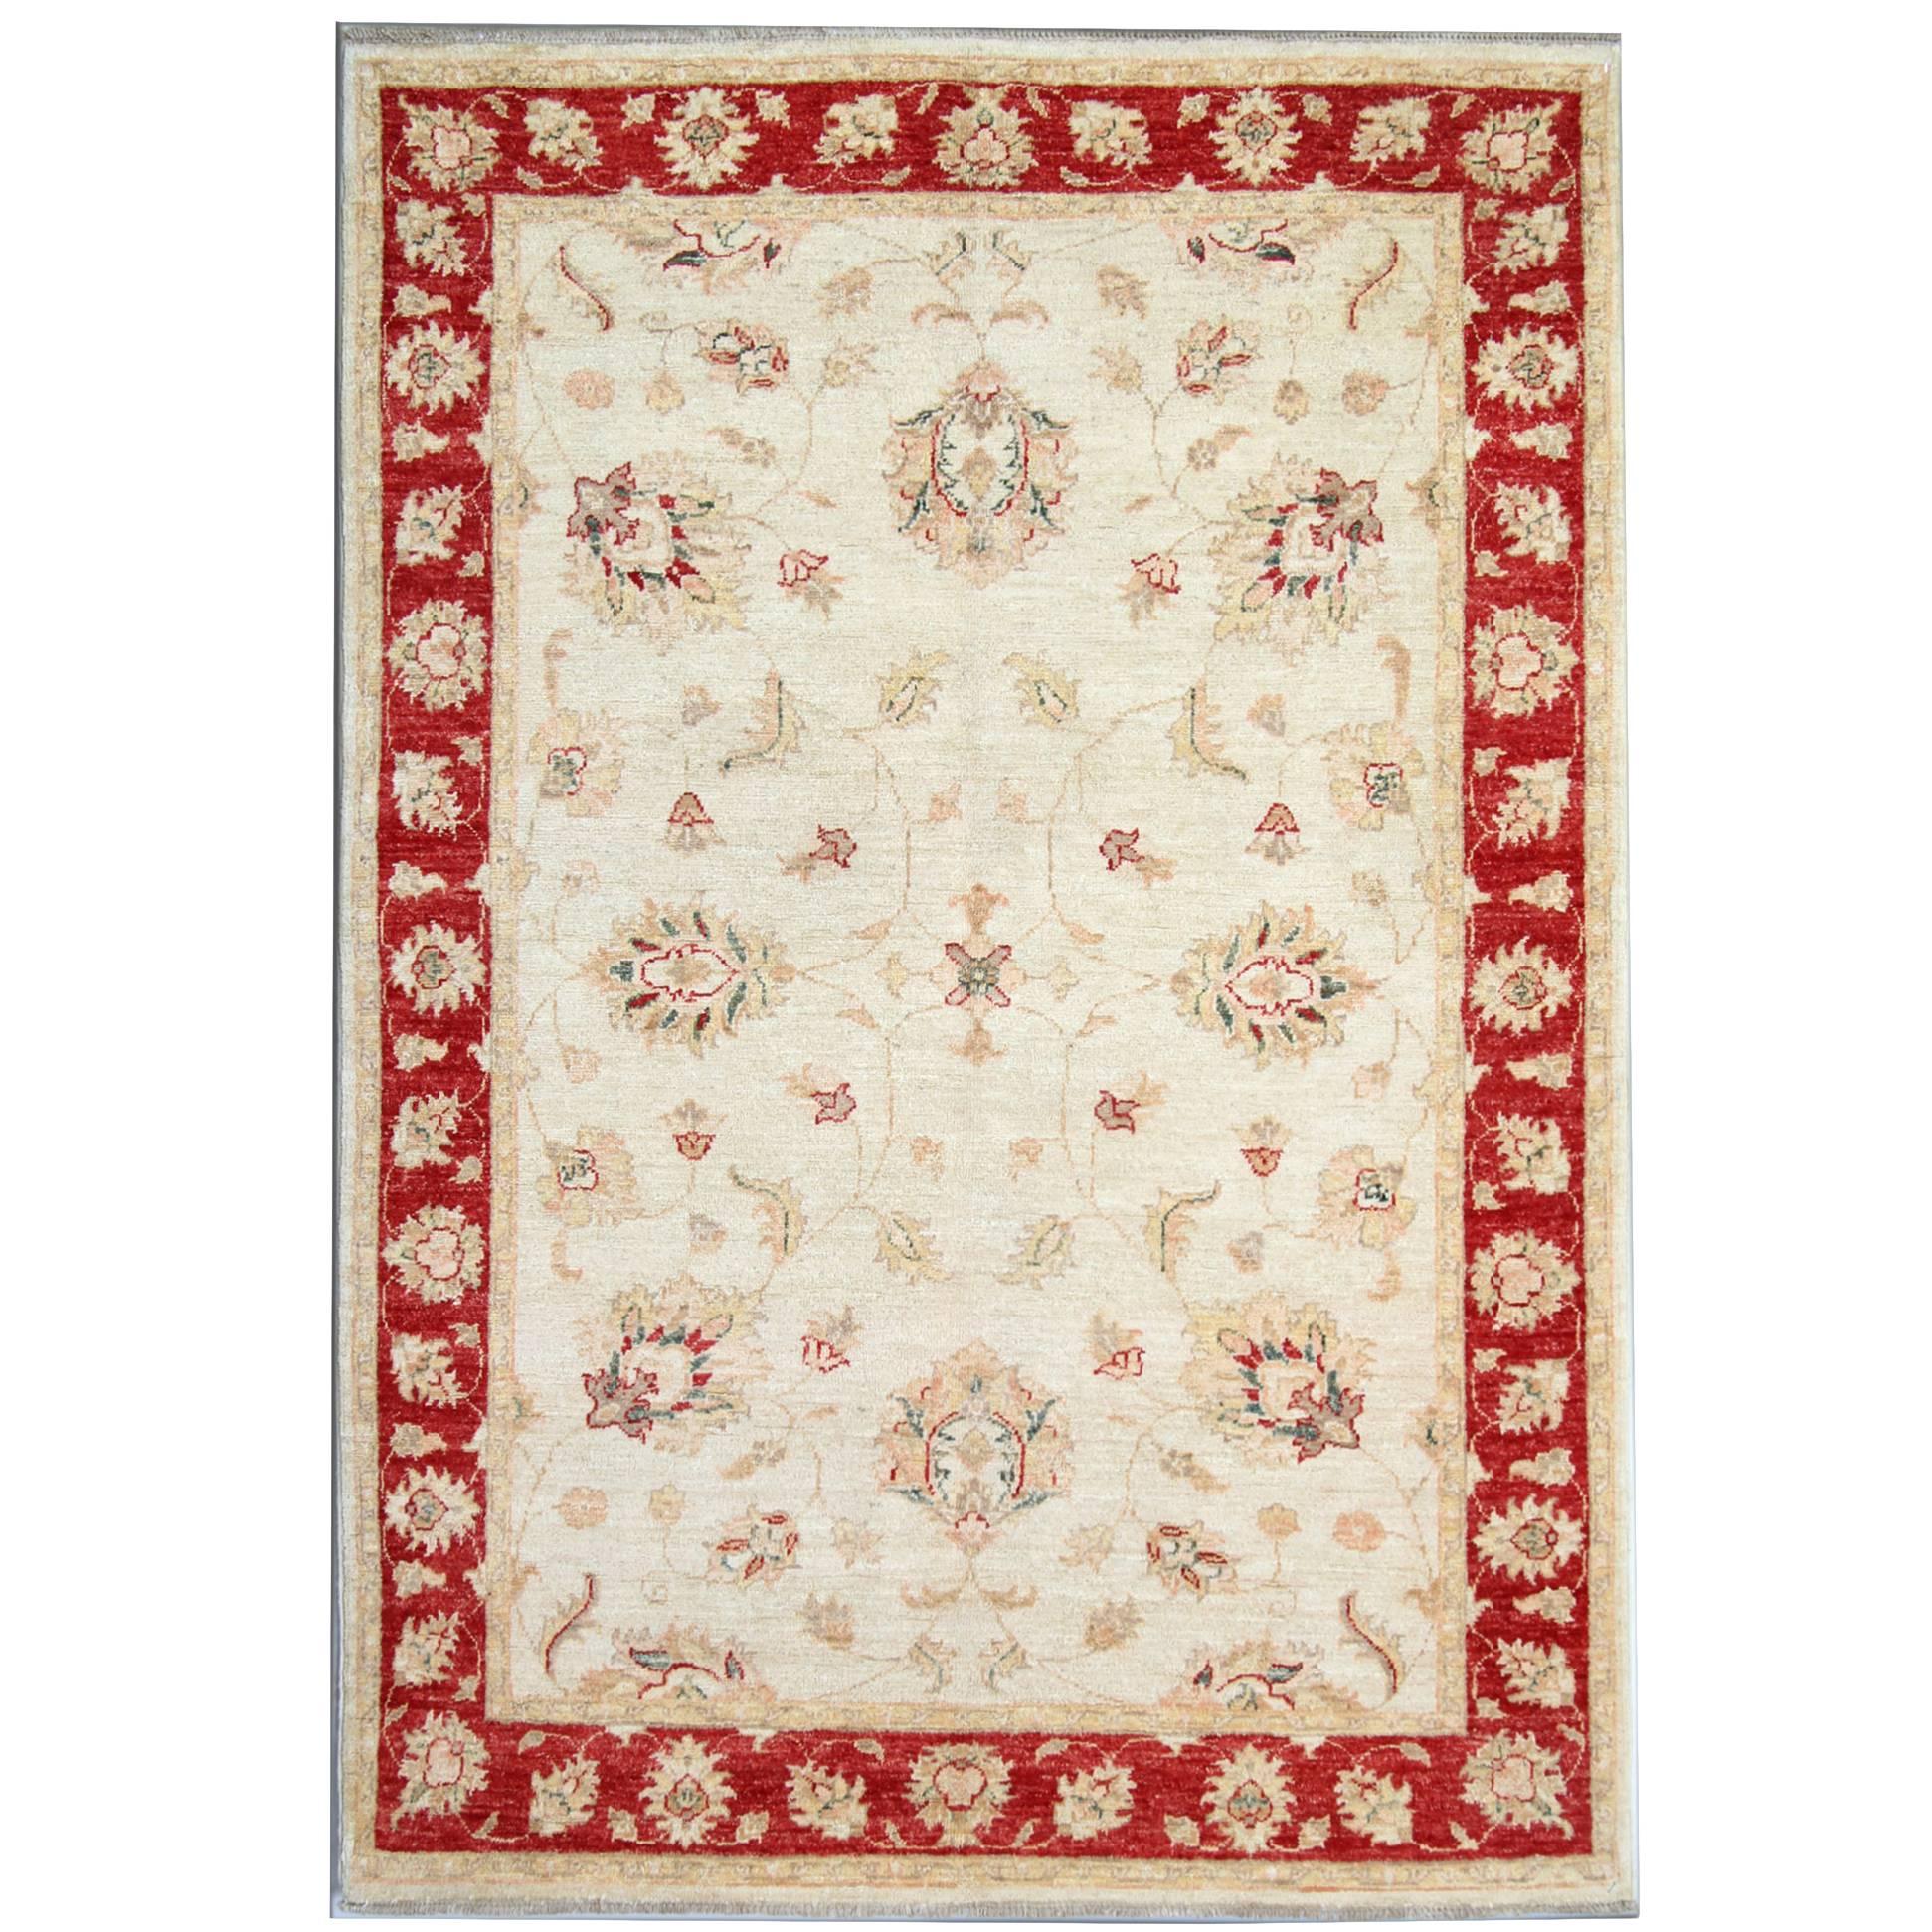 Oriental Rug Hand Made Carpet, Afghan Ziegler Style Rugs Cream Floral Rugs For Sale